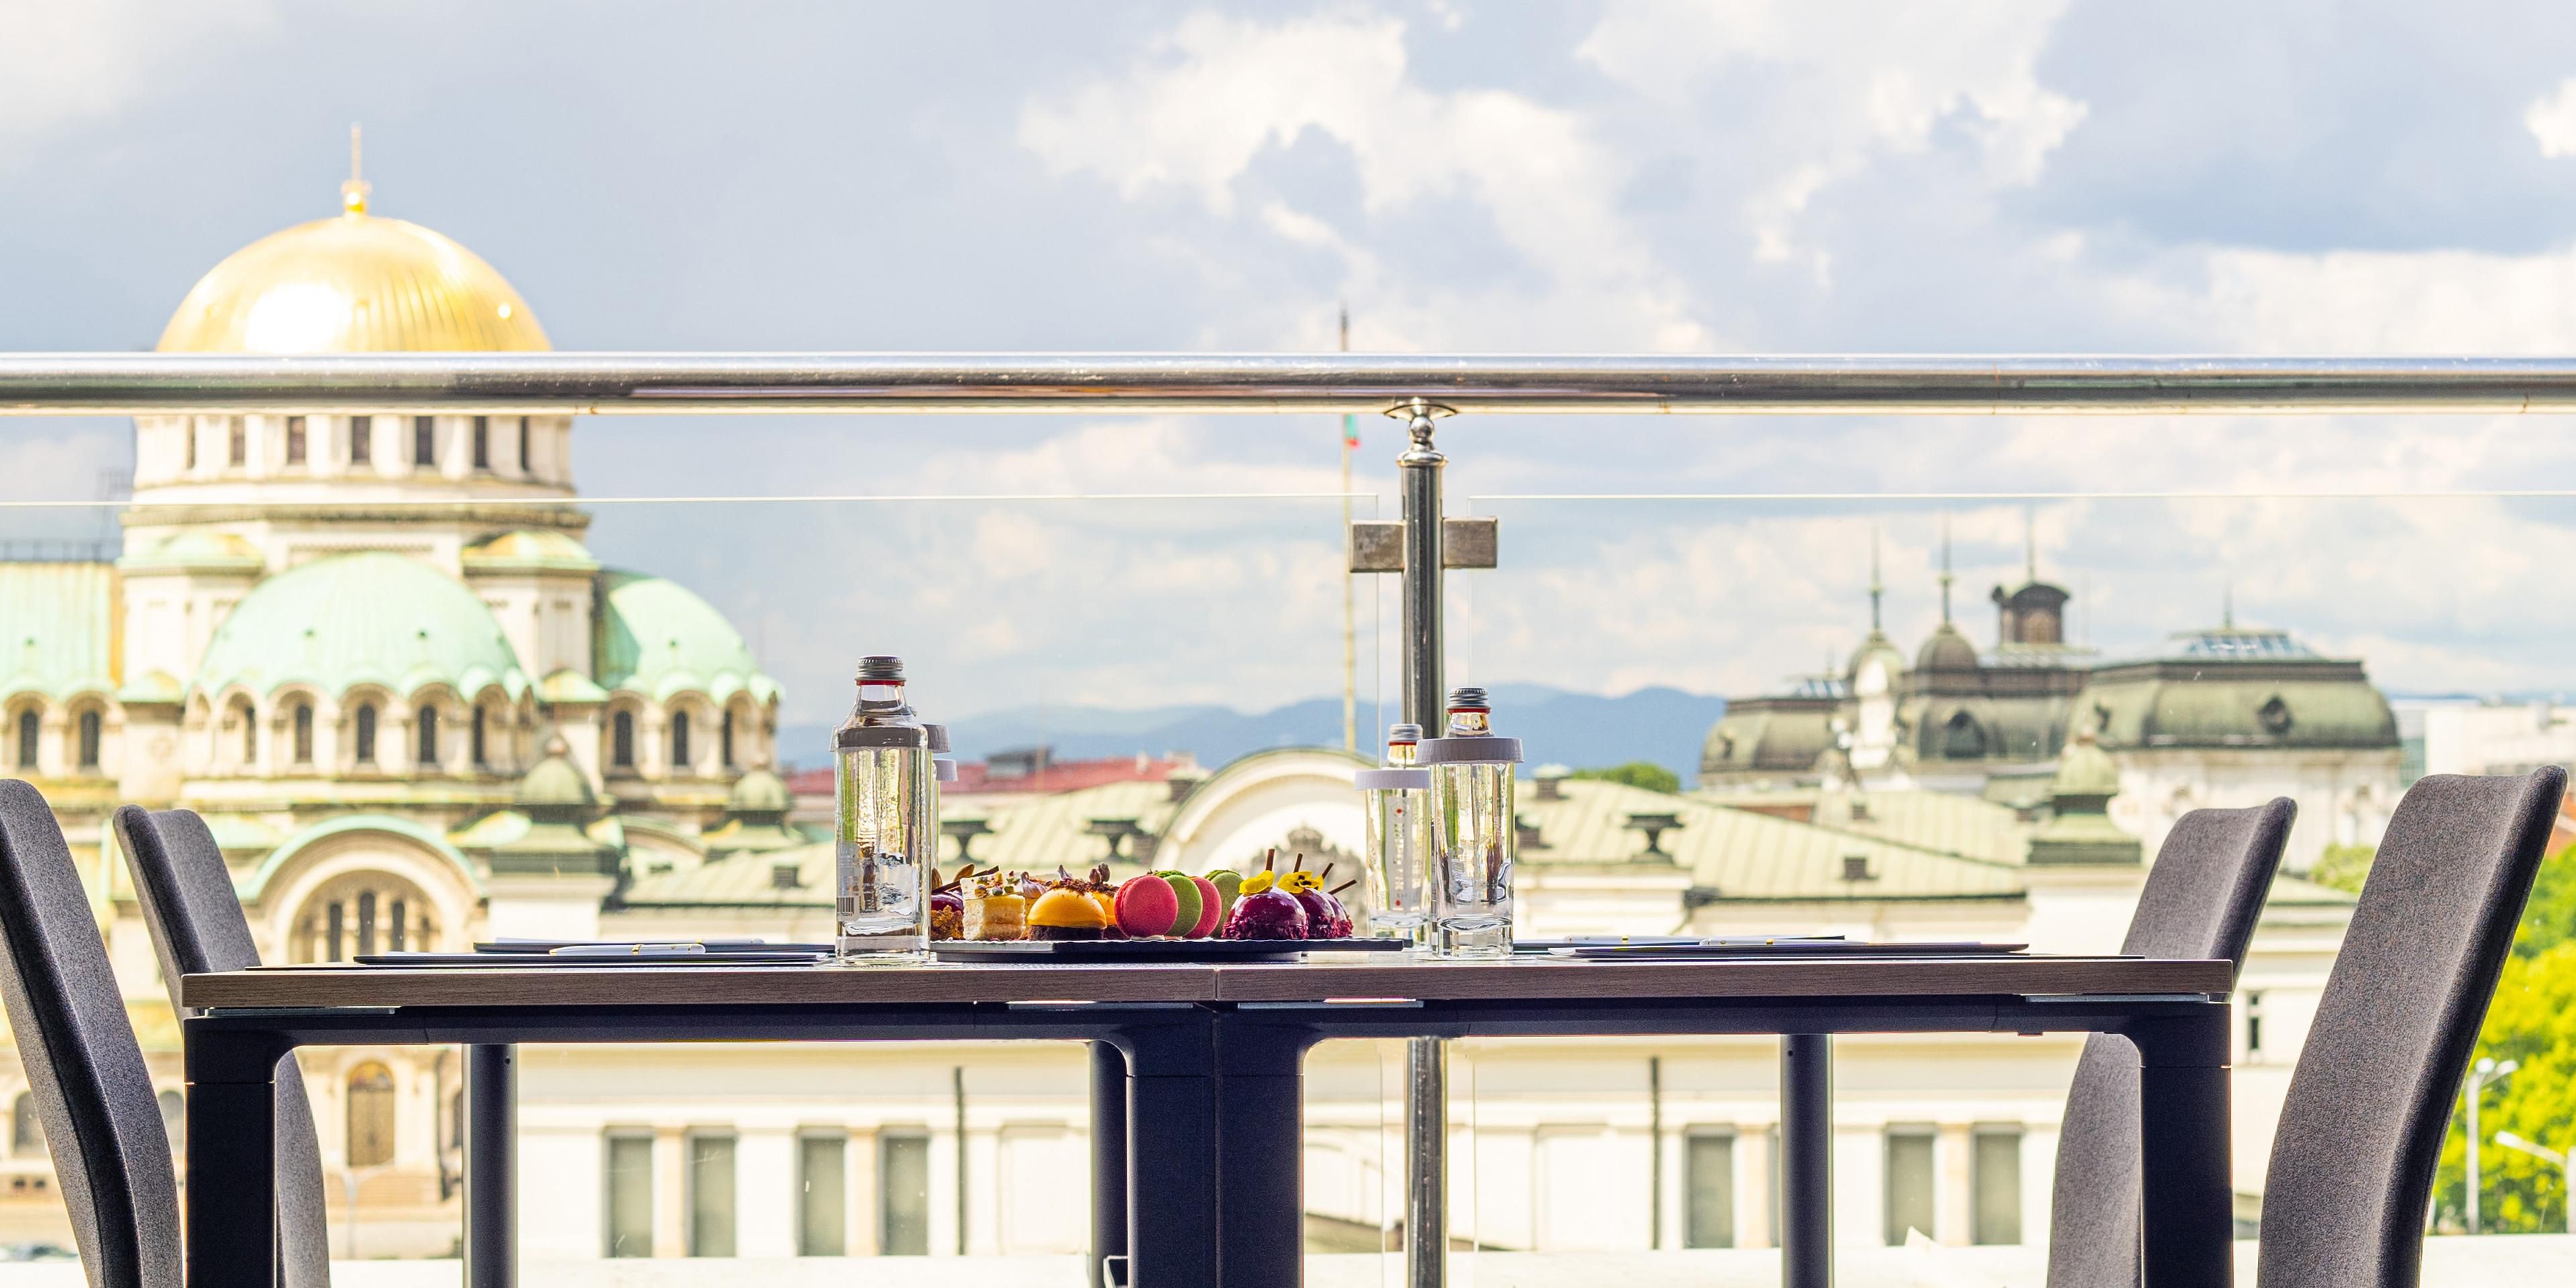 Make the most of your next meeting with the best view in Sofia and impeccable InterContinental service .Book one of our luxurious terrace suites and impress your guests with breathtaking views and variety of premium coffee break and room service offerings. Contact meetings.icsofia@ihg.com to inquire and book. 